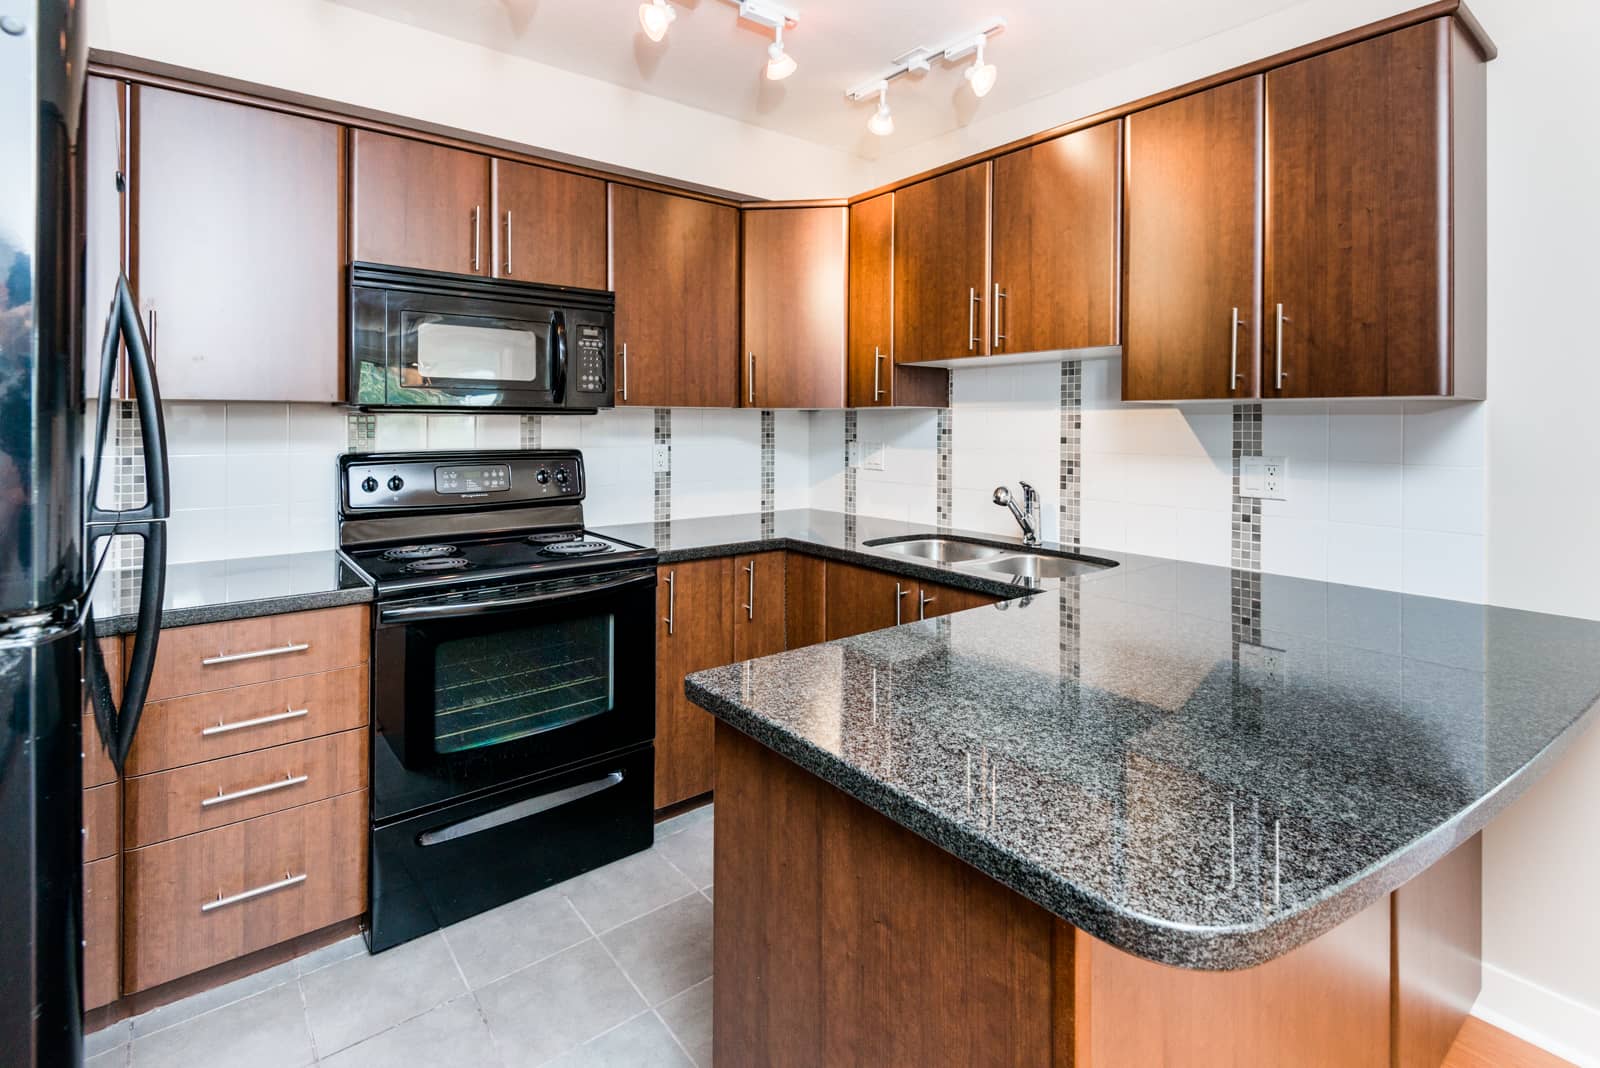 2 Bed + Den at Liberty in Cloverdale